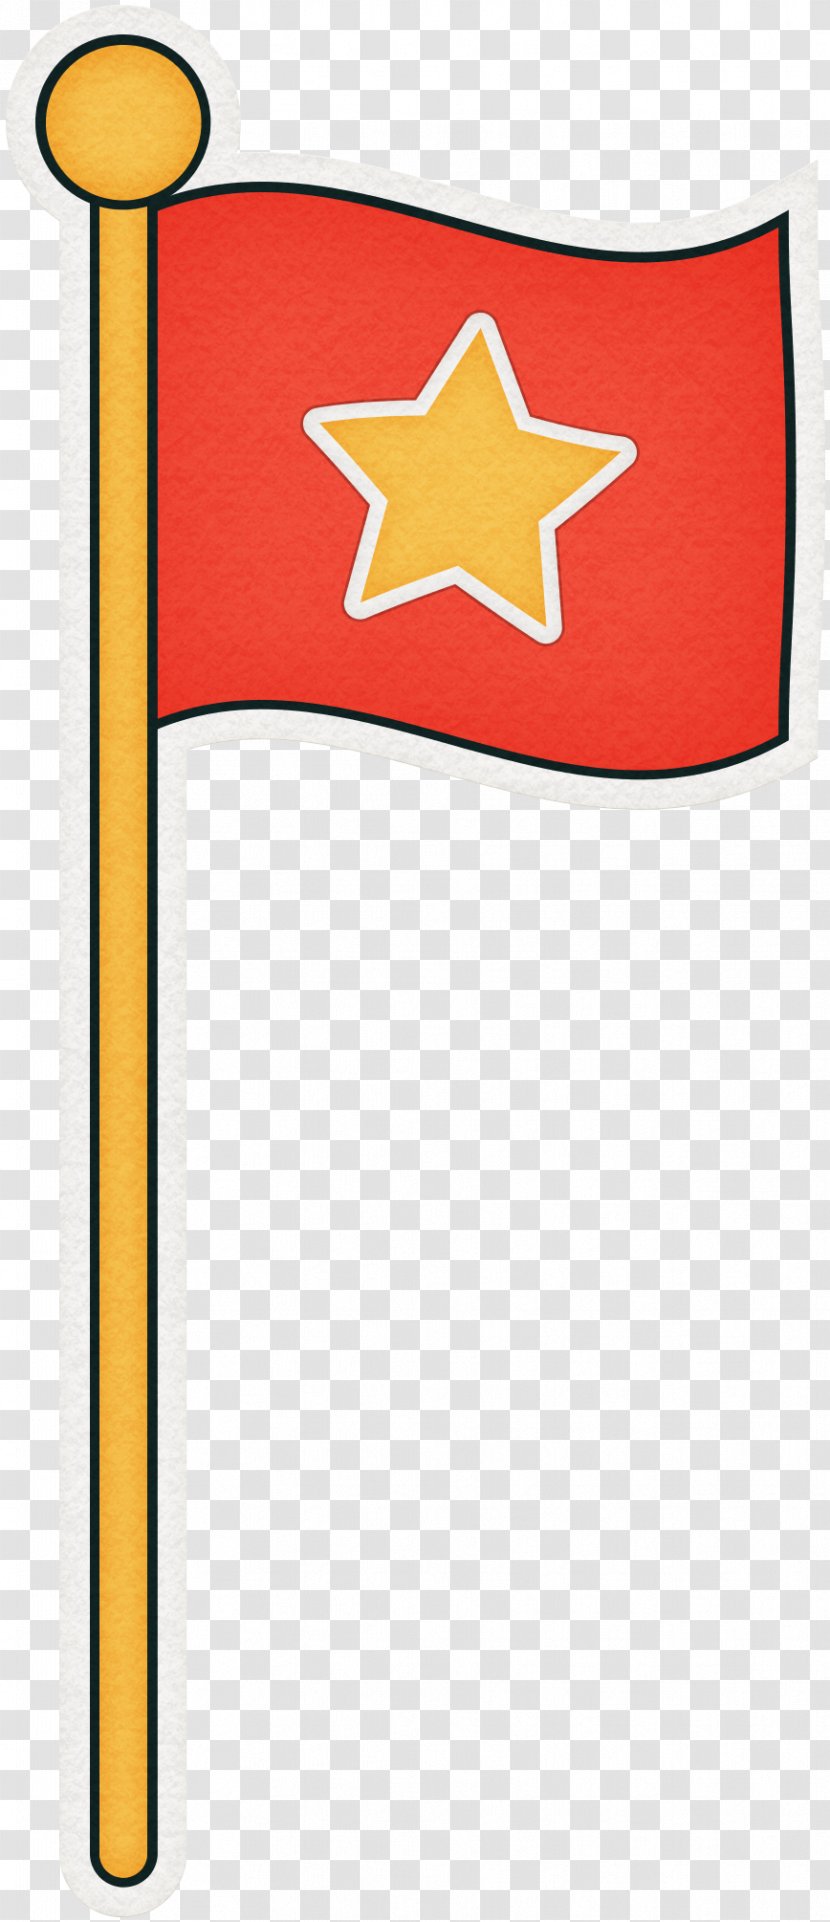 Flag Cartoon Download - Red Five-pointed Star Transparent PNG